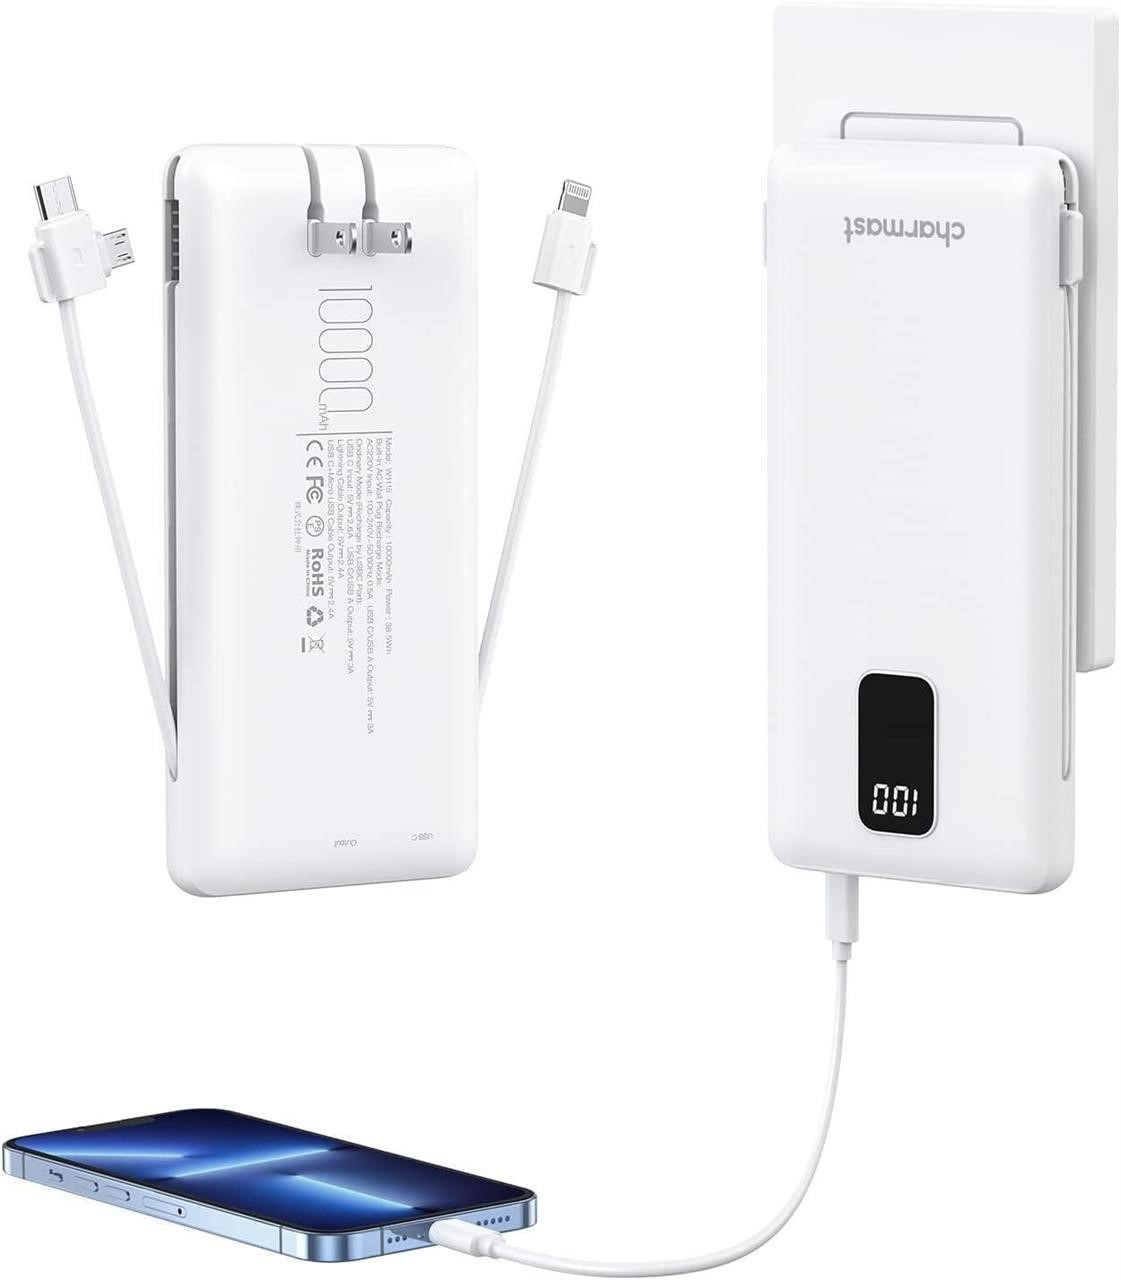 Portable Charger with Built in Cable